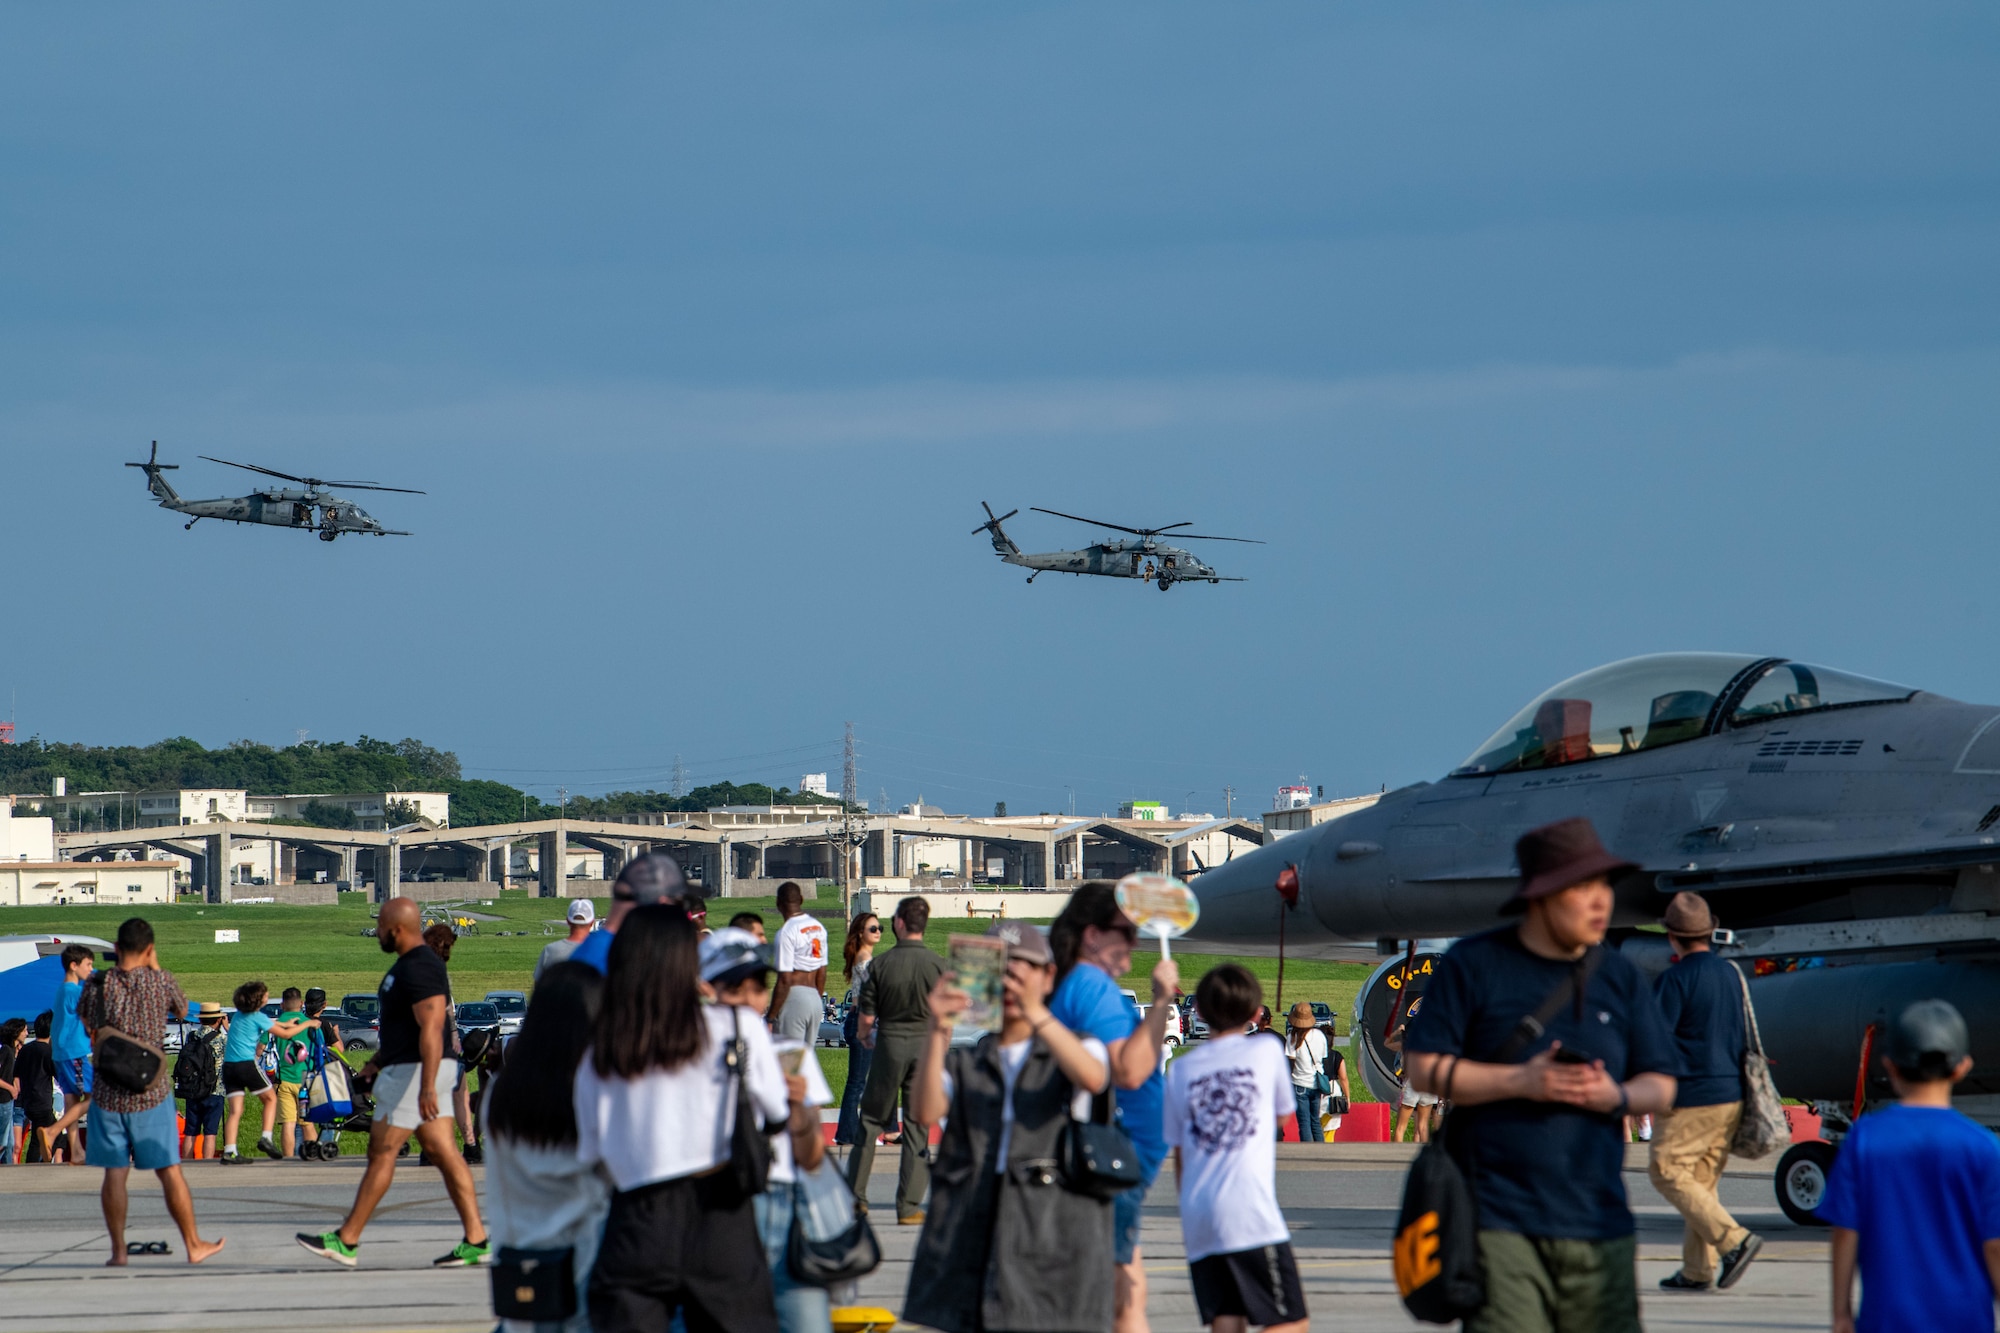 Festival attendees observe HH-60 Pave Hawks assigned to the 33rd Rescue Squadron conduct a training flight, during America Fest 2024, at Kadena Air Base, Japan, April 27, 2024.